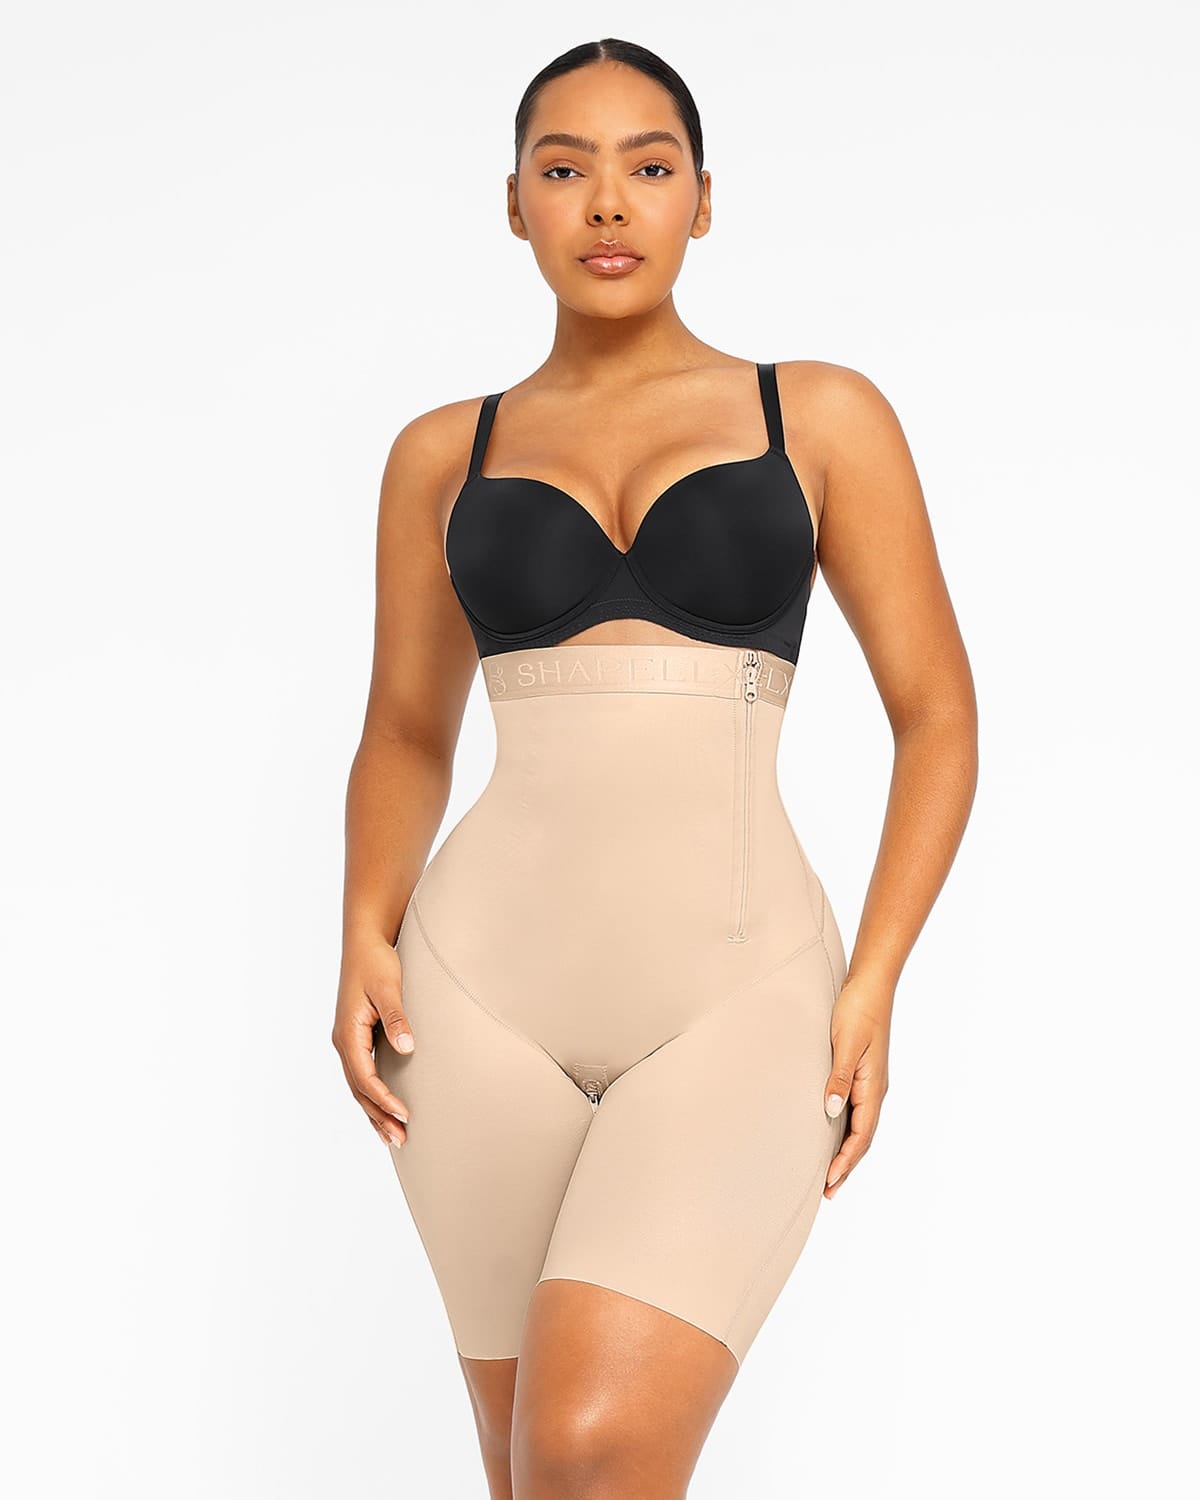 Top Shapers from Shapellx Absolutely Fit the Bill – Shelbee on the